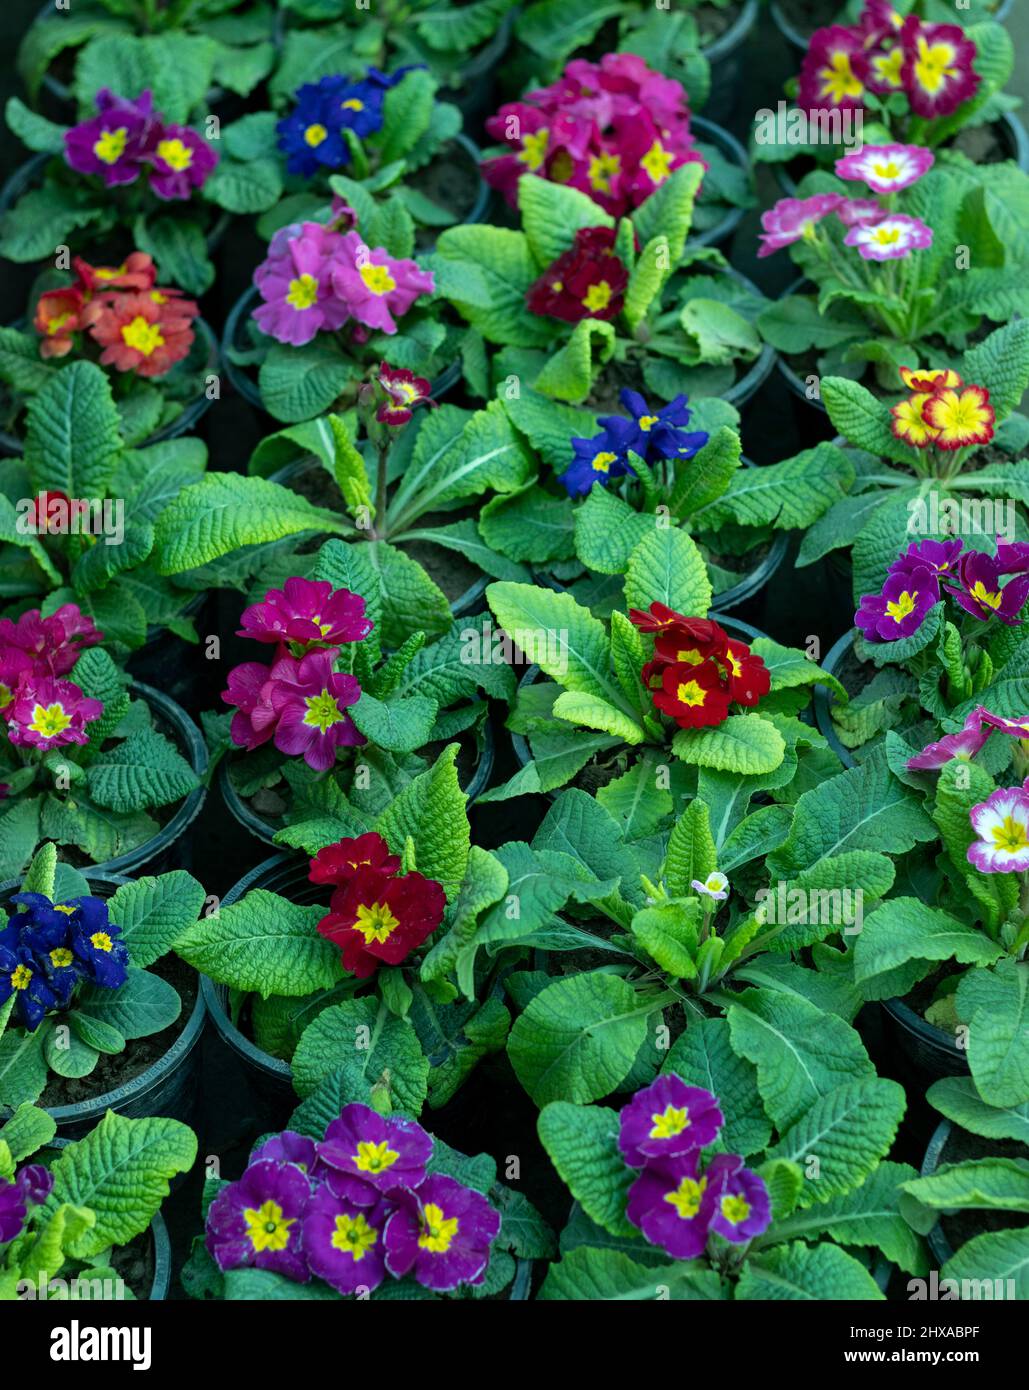 Primrose flowers planted as a ground cover Stock Photo